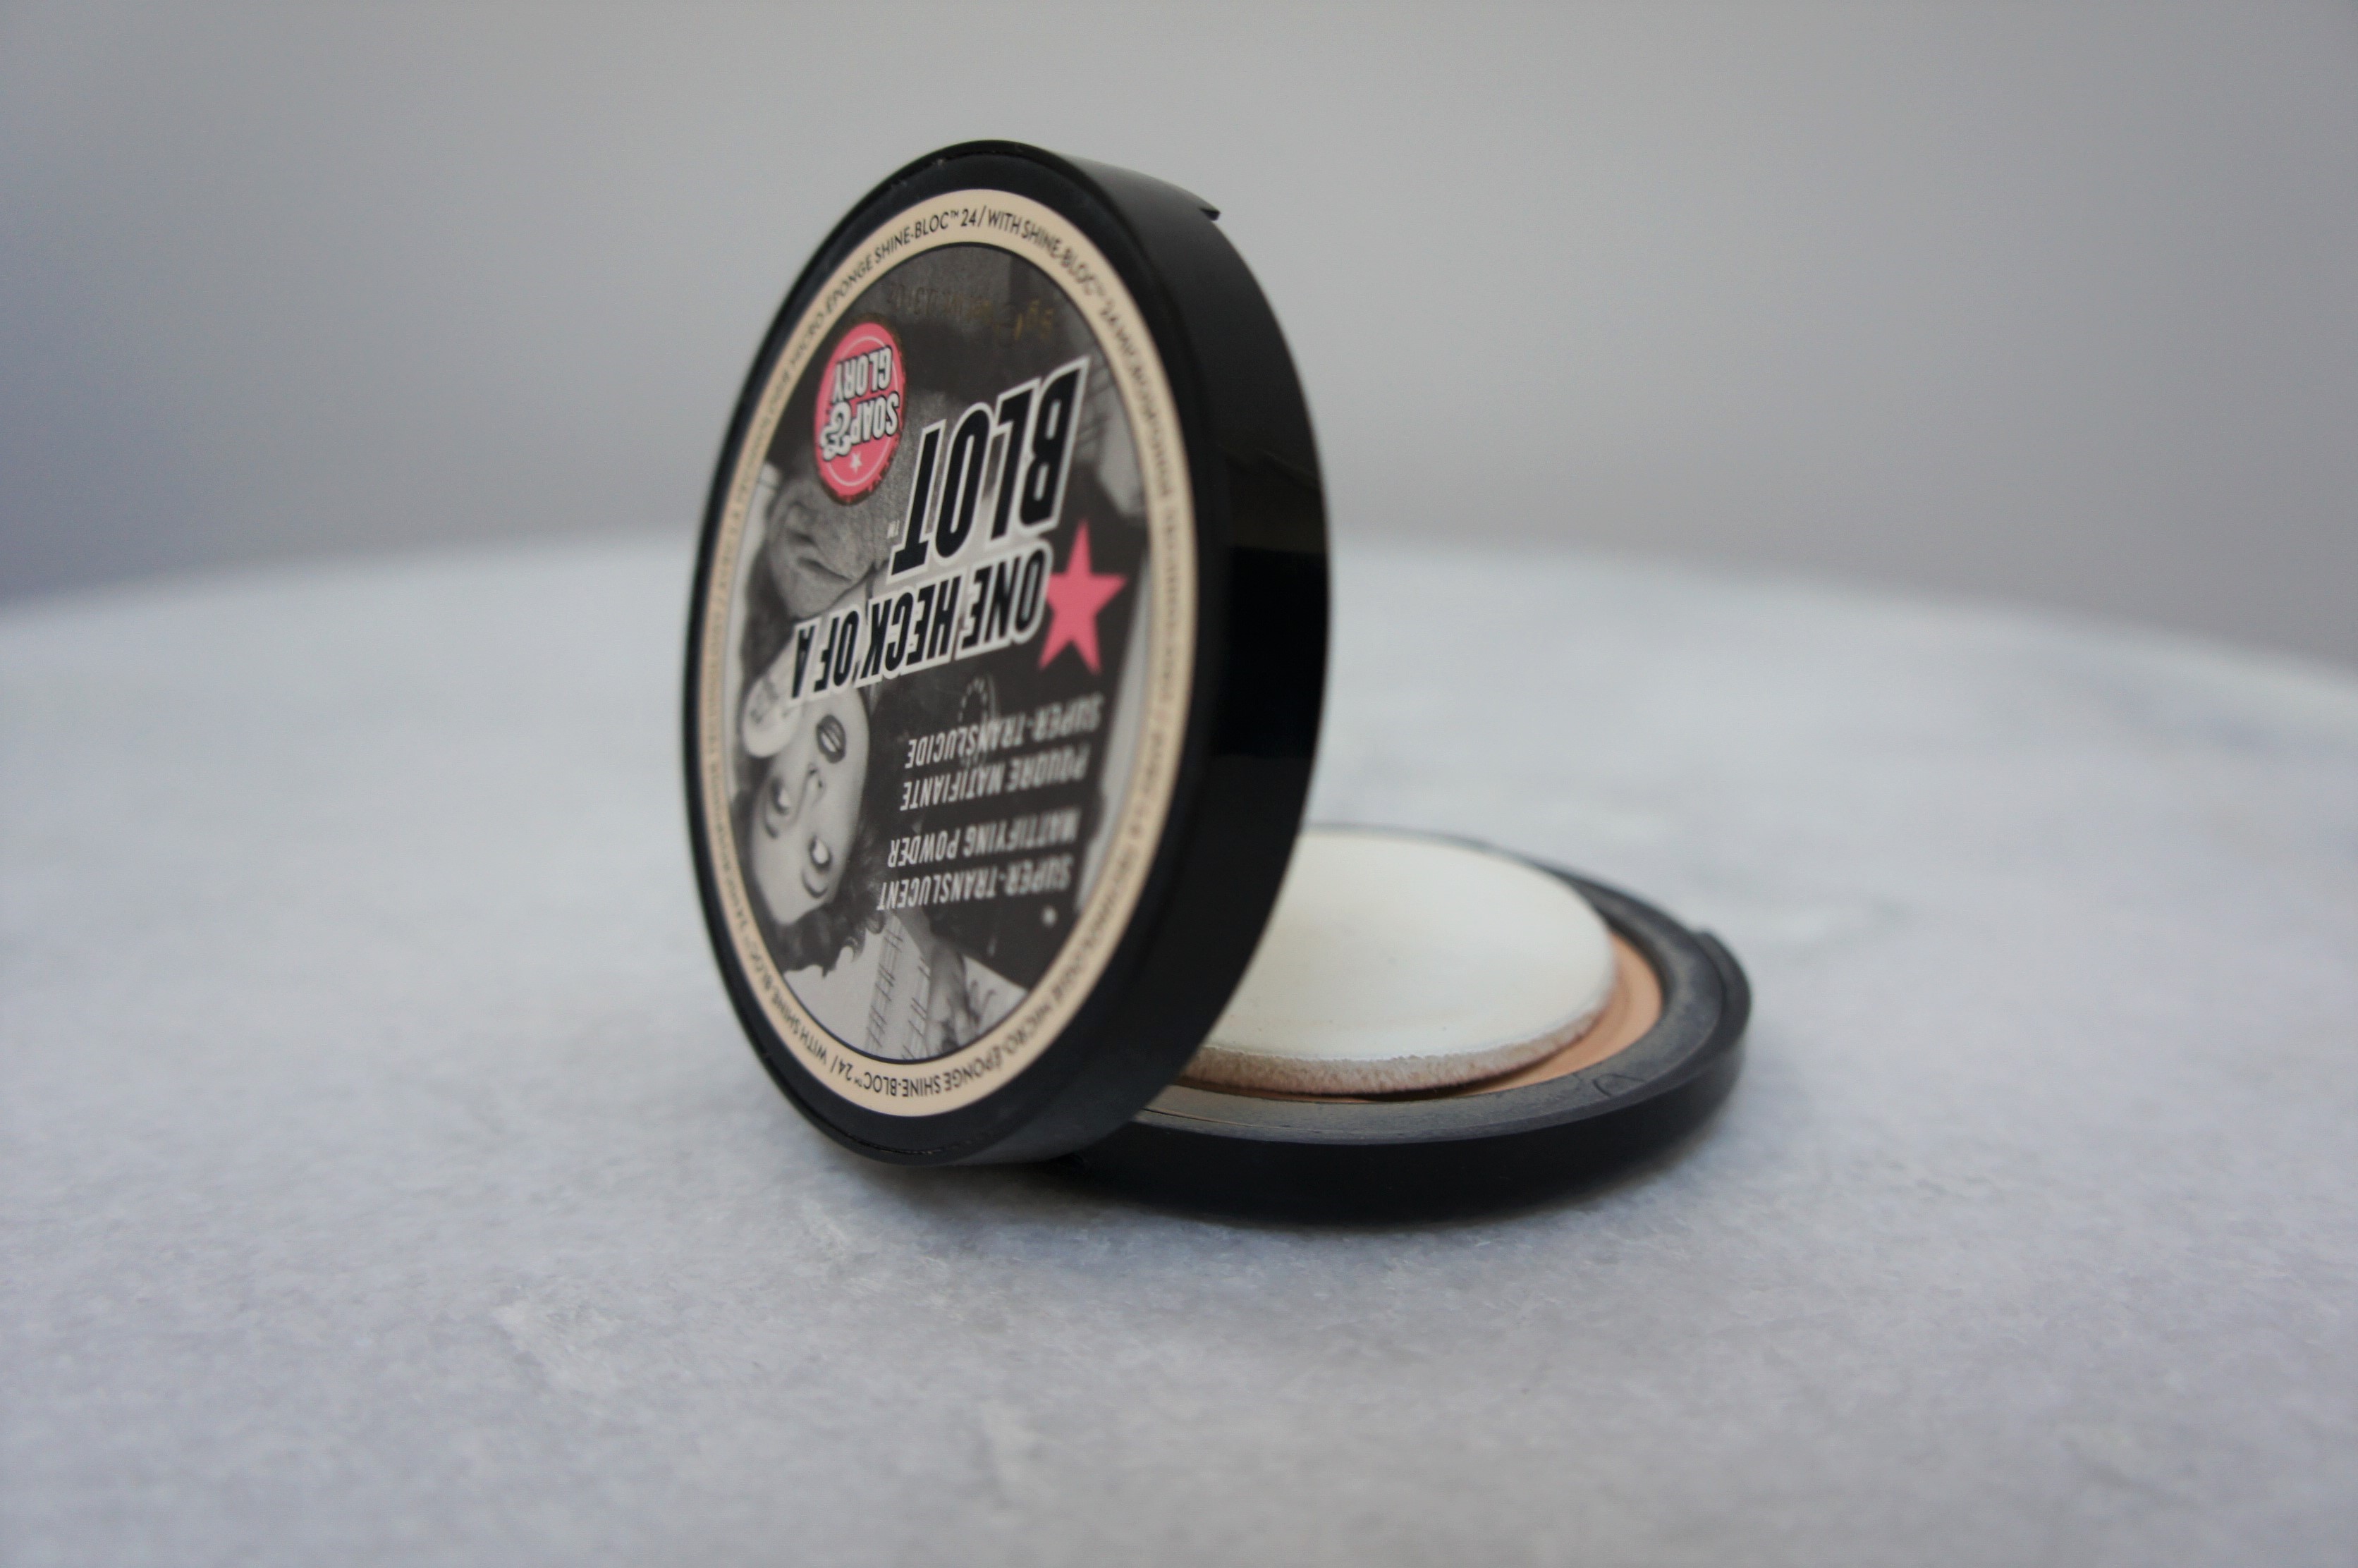 Soap & Glory One Heck of a Blot powder